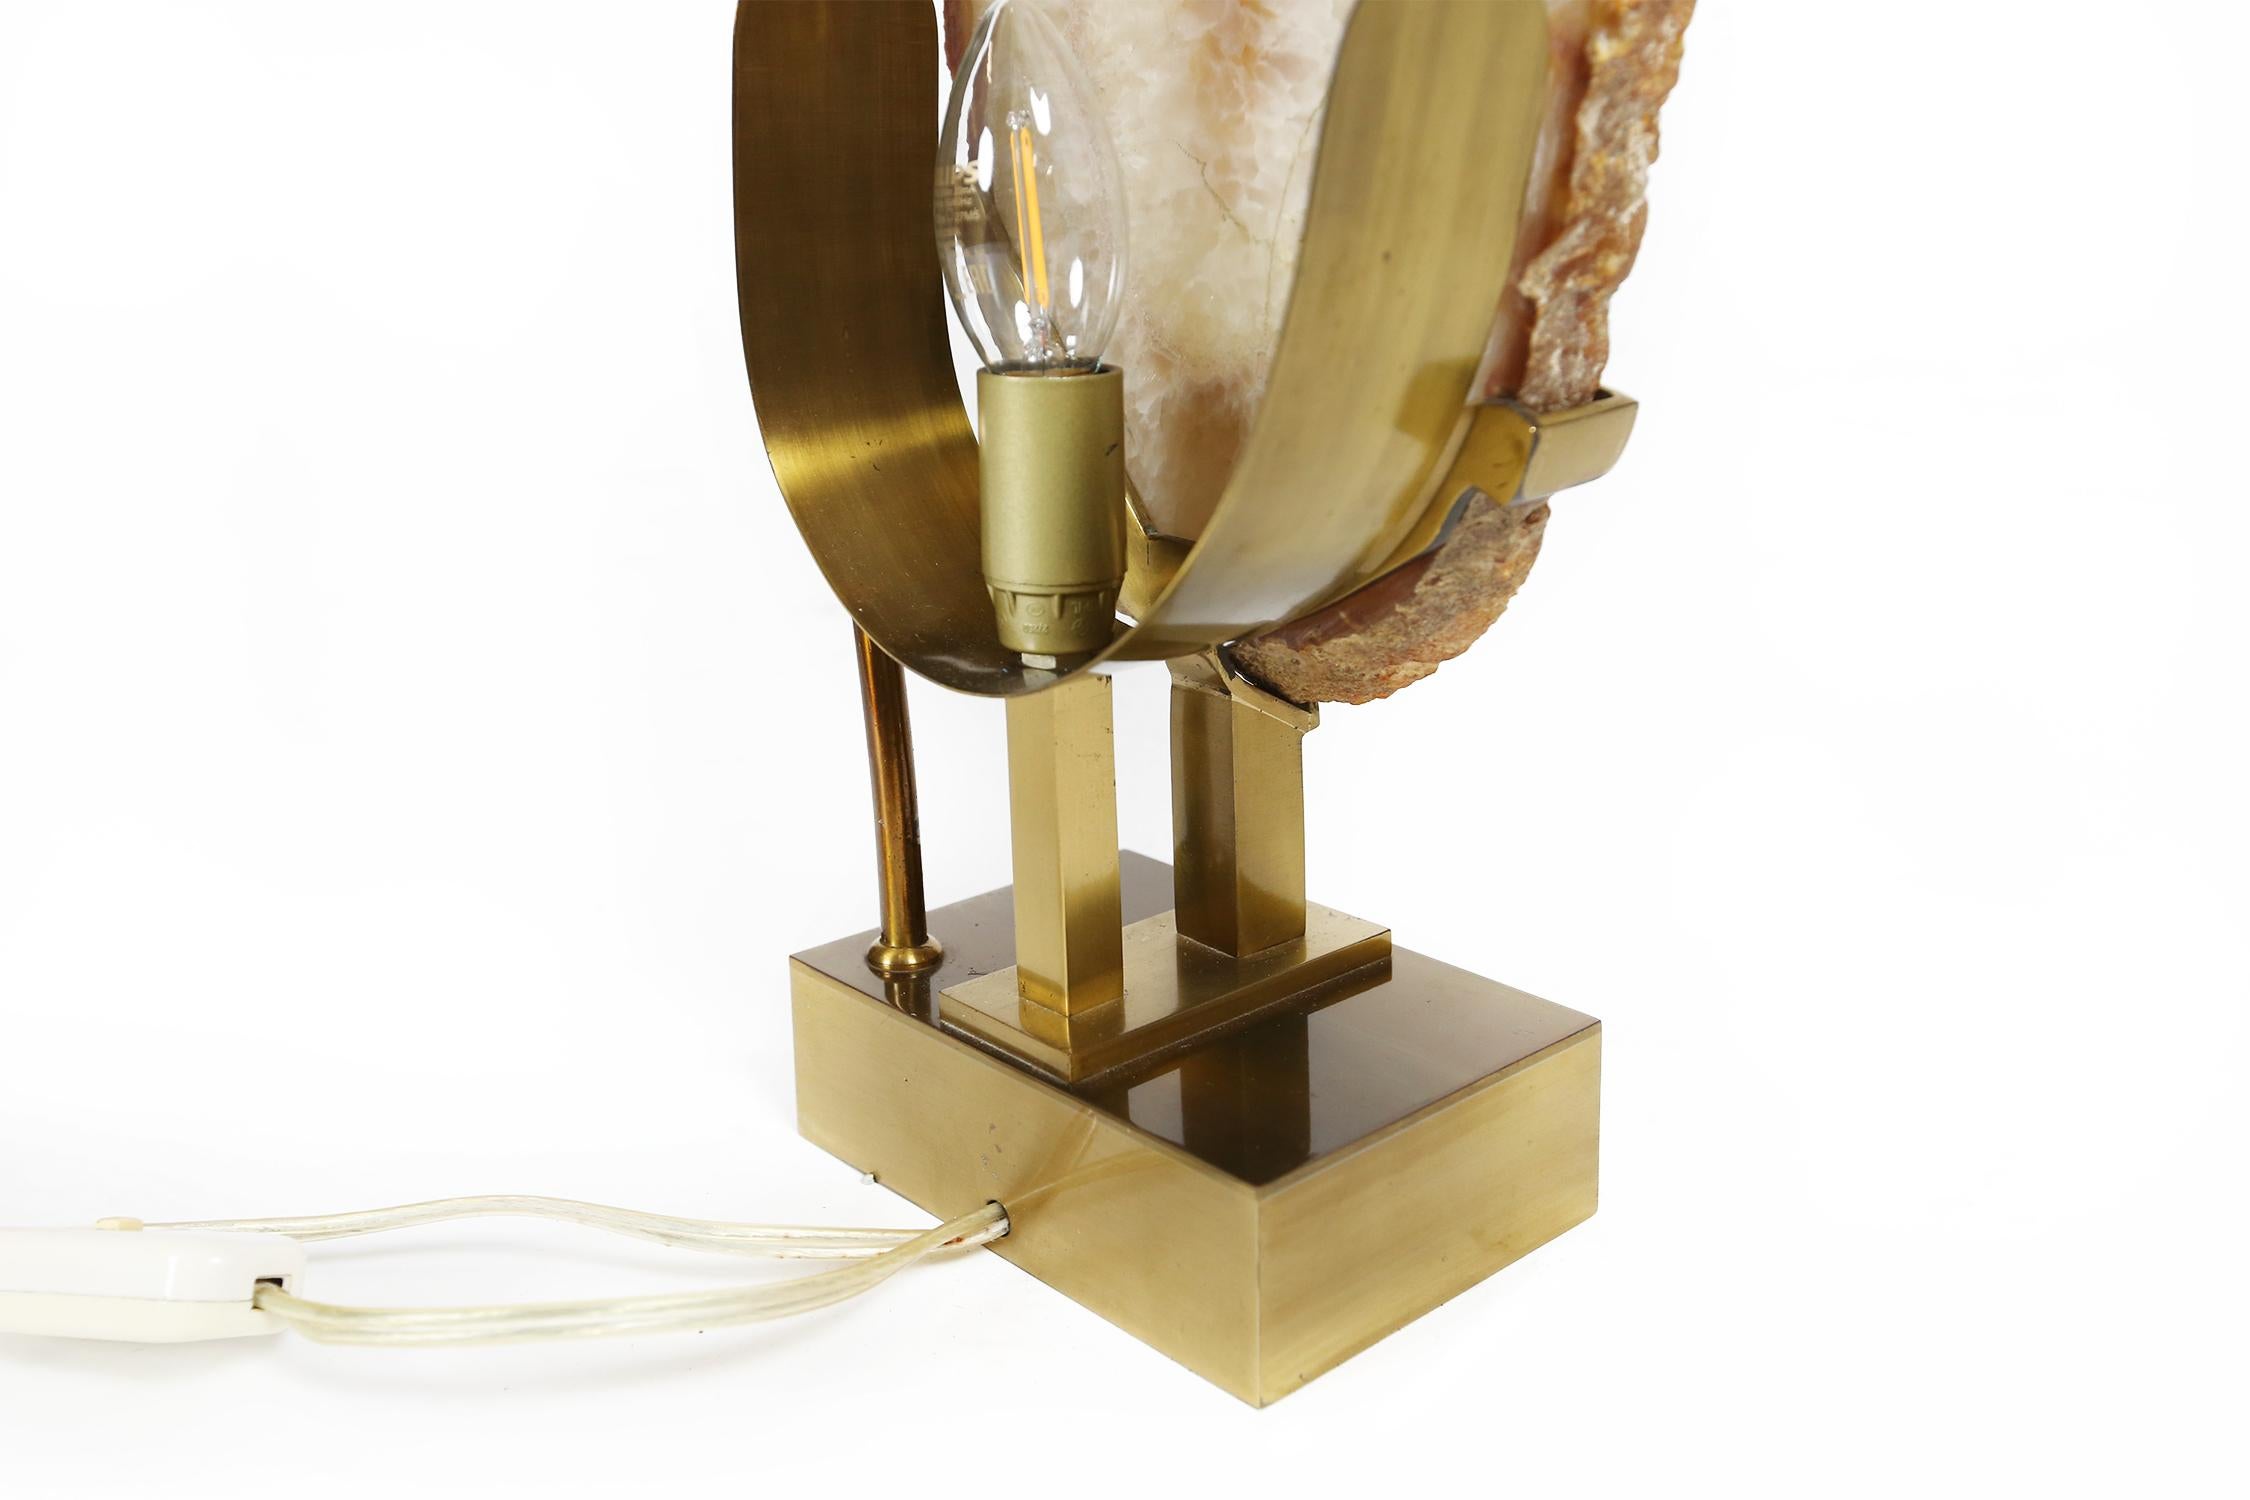 Willy Daro Large Bronze and Agate Table Lamp, 1970s (Ende des 20. Jahrhunderts)